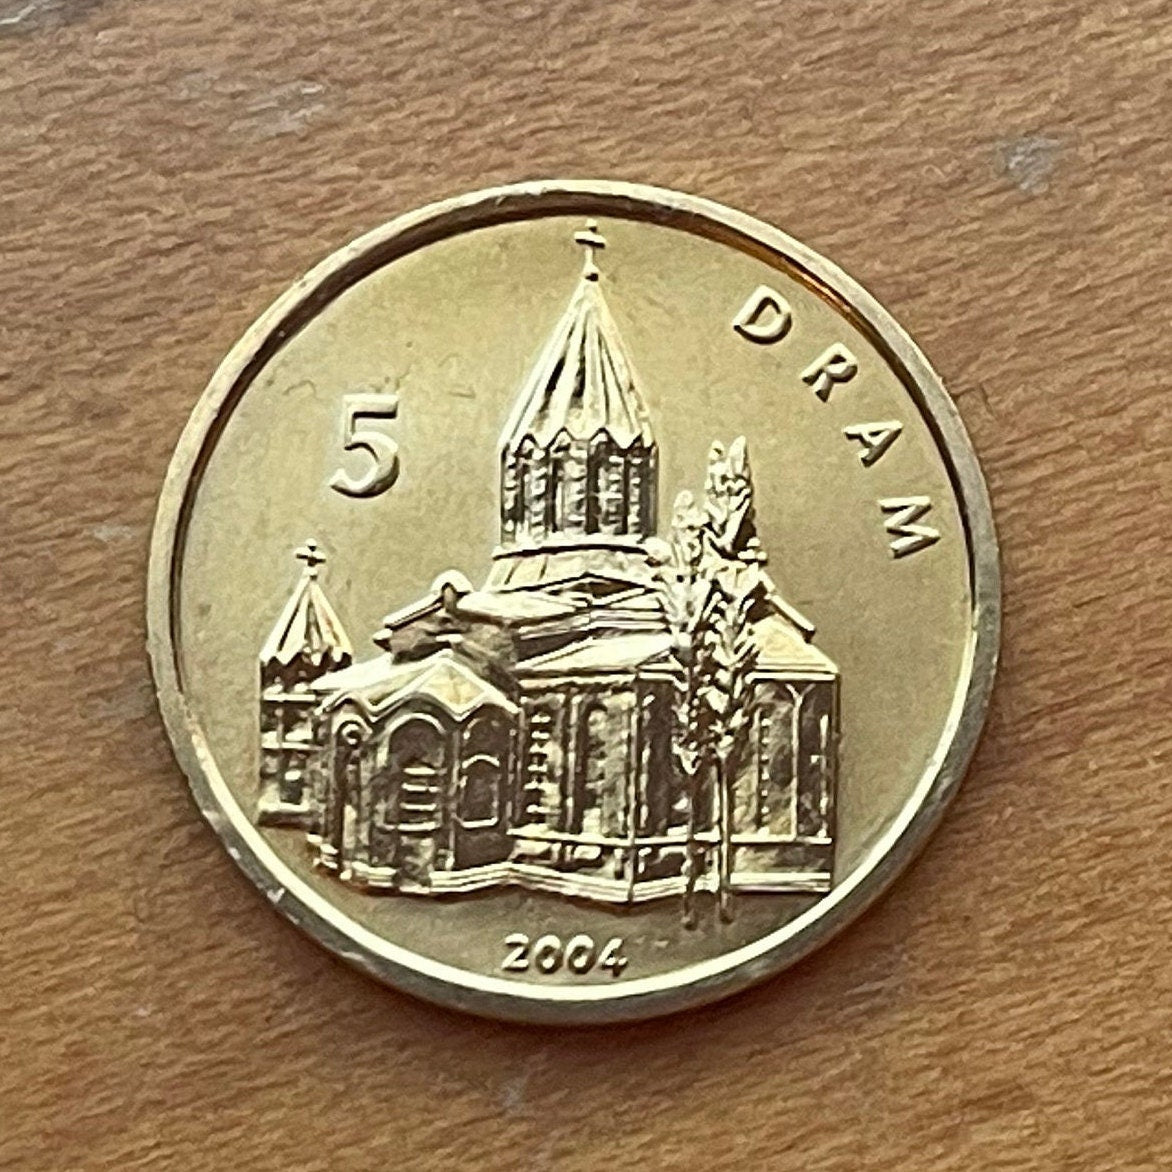 Holy Savior Cathedral 5 Drams Nagorno-Karabakh Authentic Coin Money for Jewelry and Craft Making (Ghazanchetsots) (2004) (Armenian Coin)